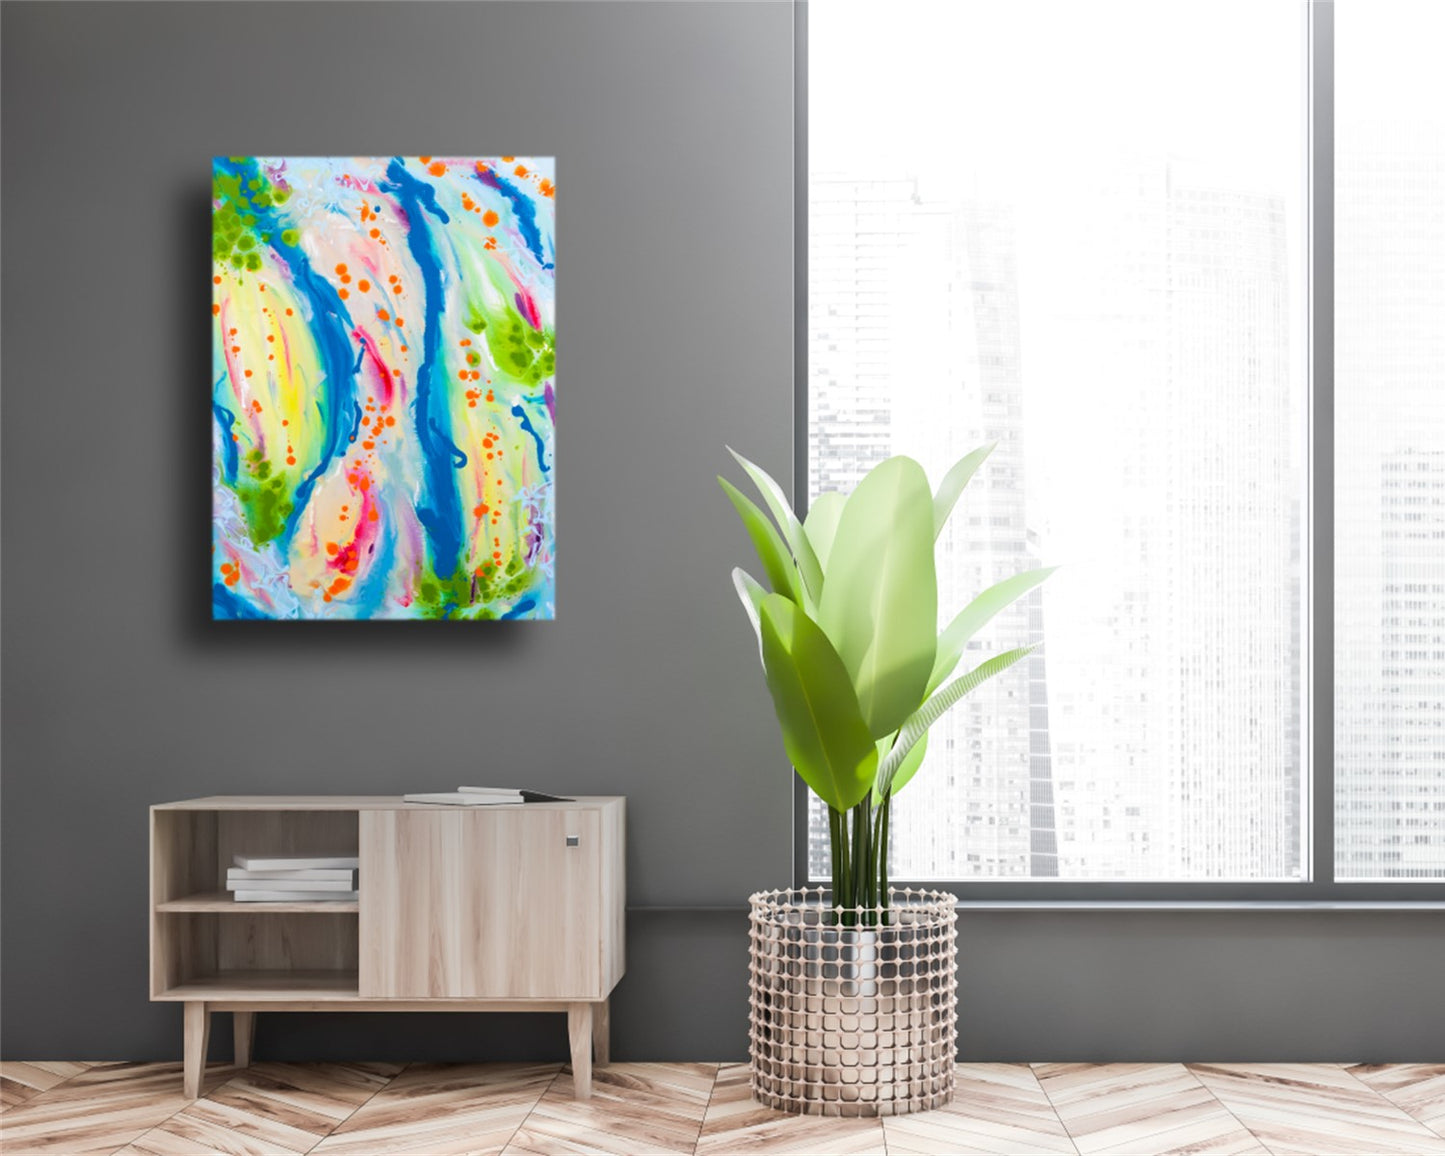 Graceless Gramercy - Original Abstract Painting in Austin Texas 30" x 40"